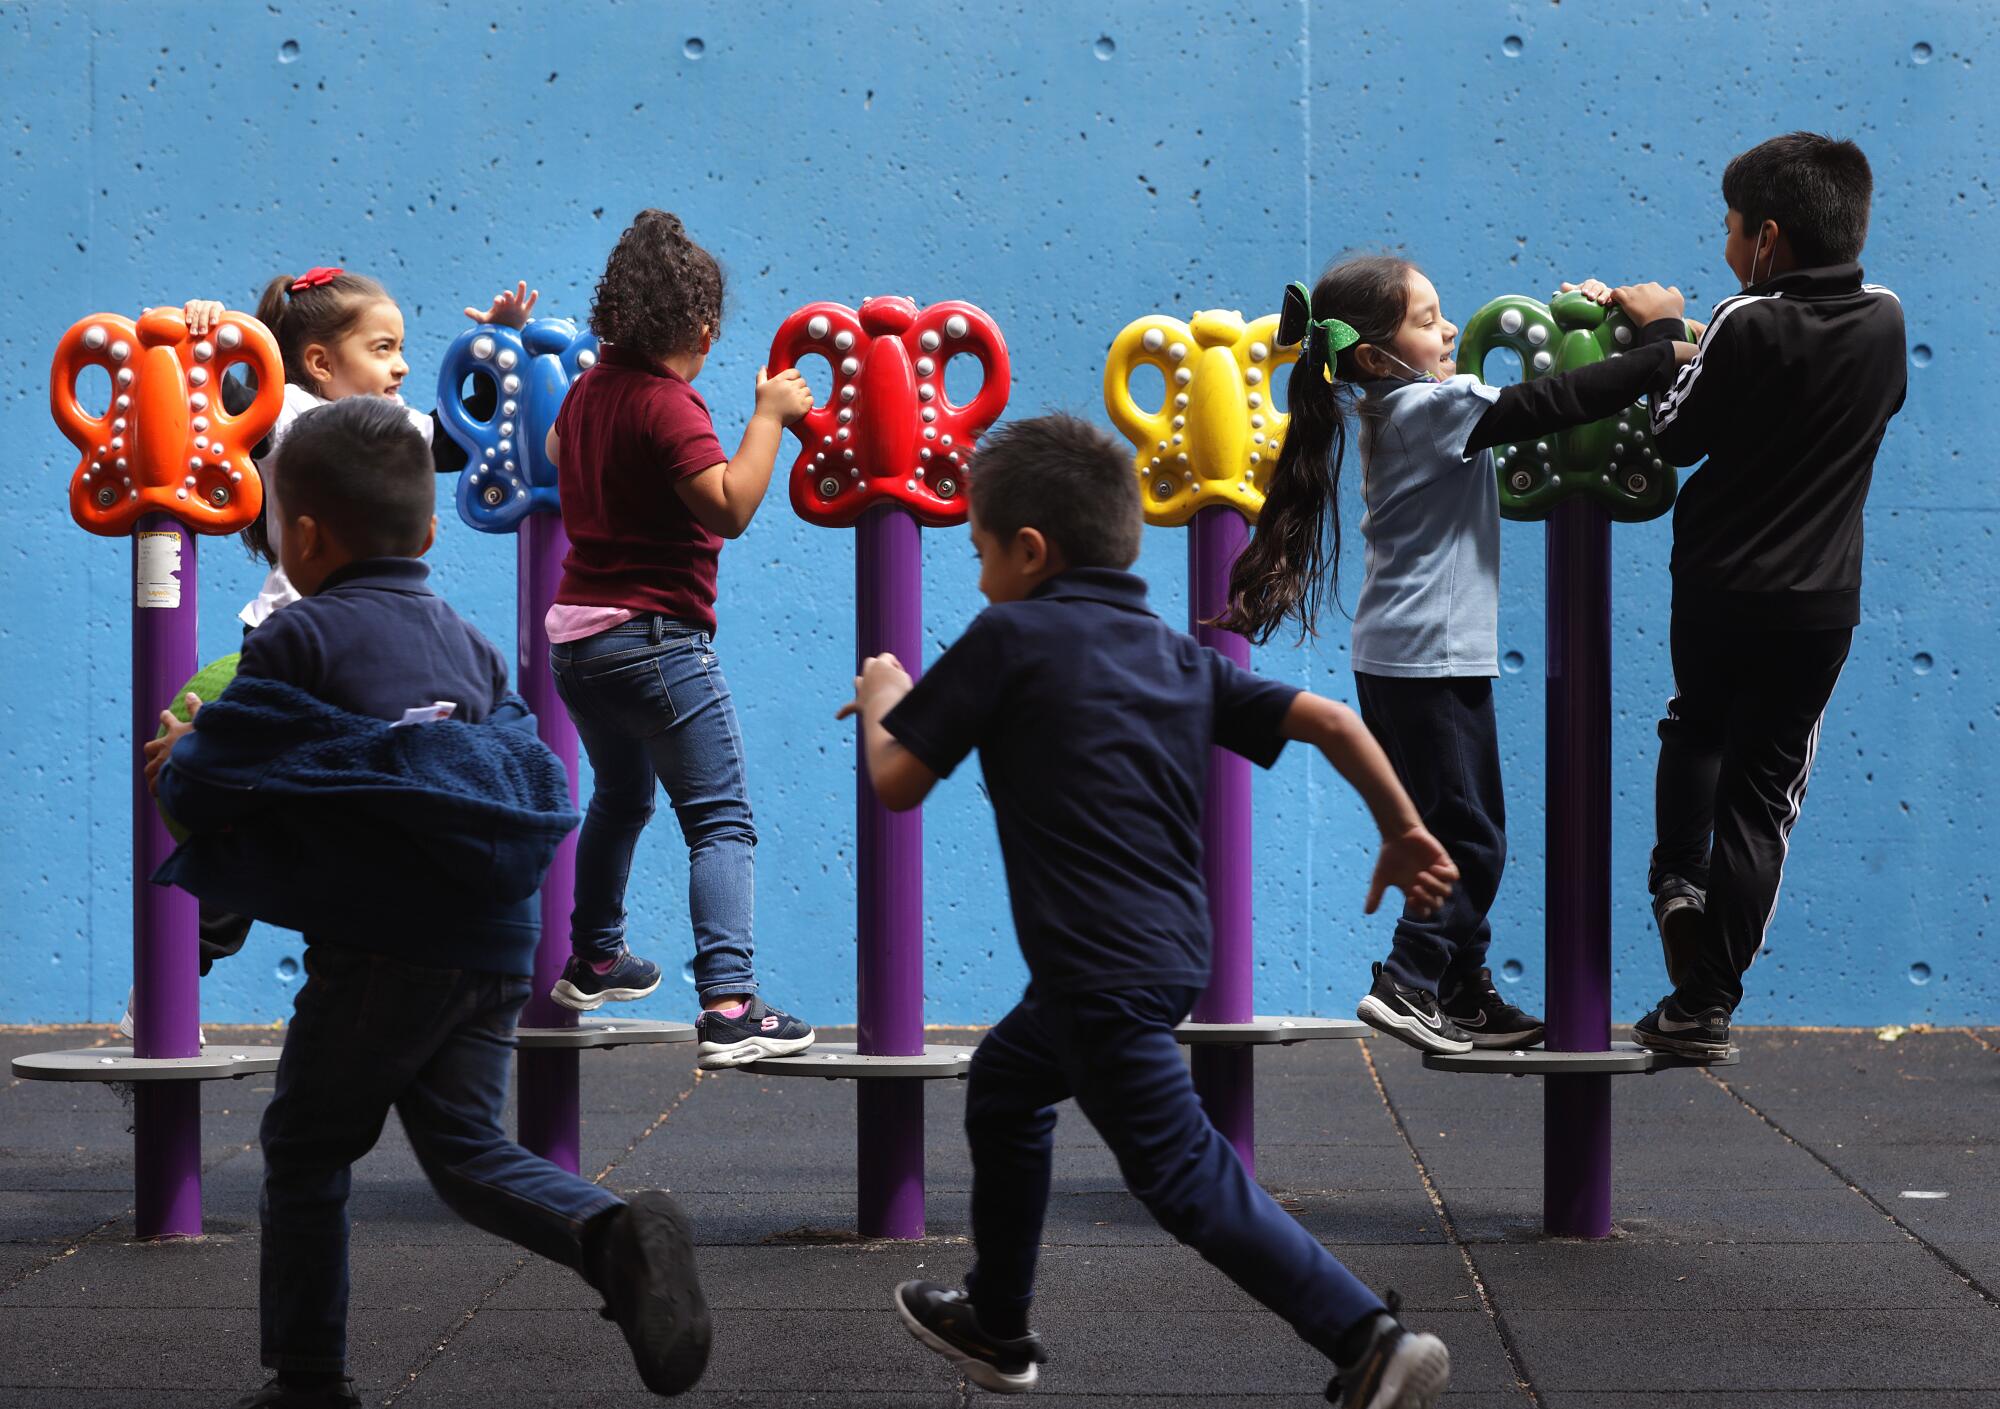 Small children stand on playground equipment as others rush to join them.